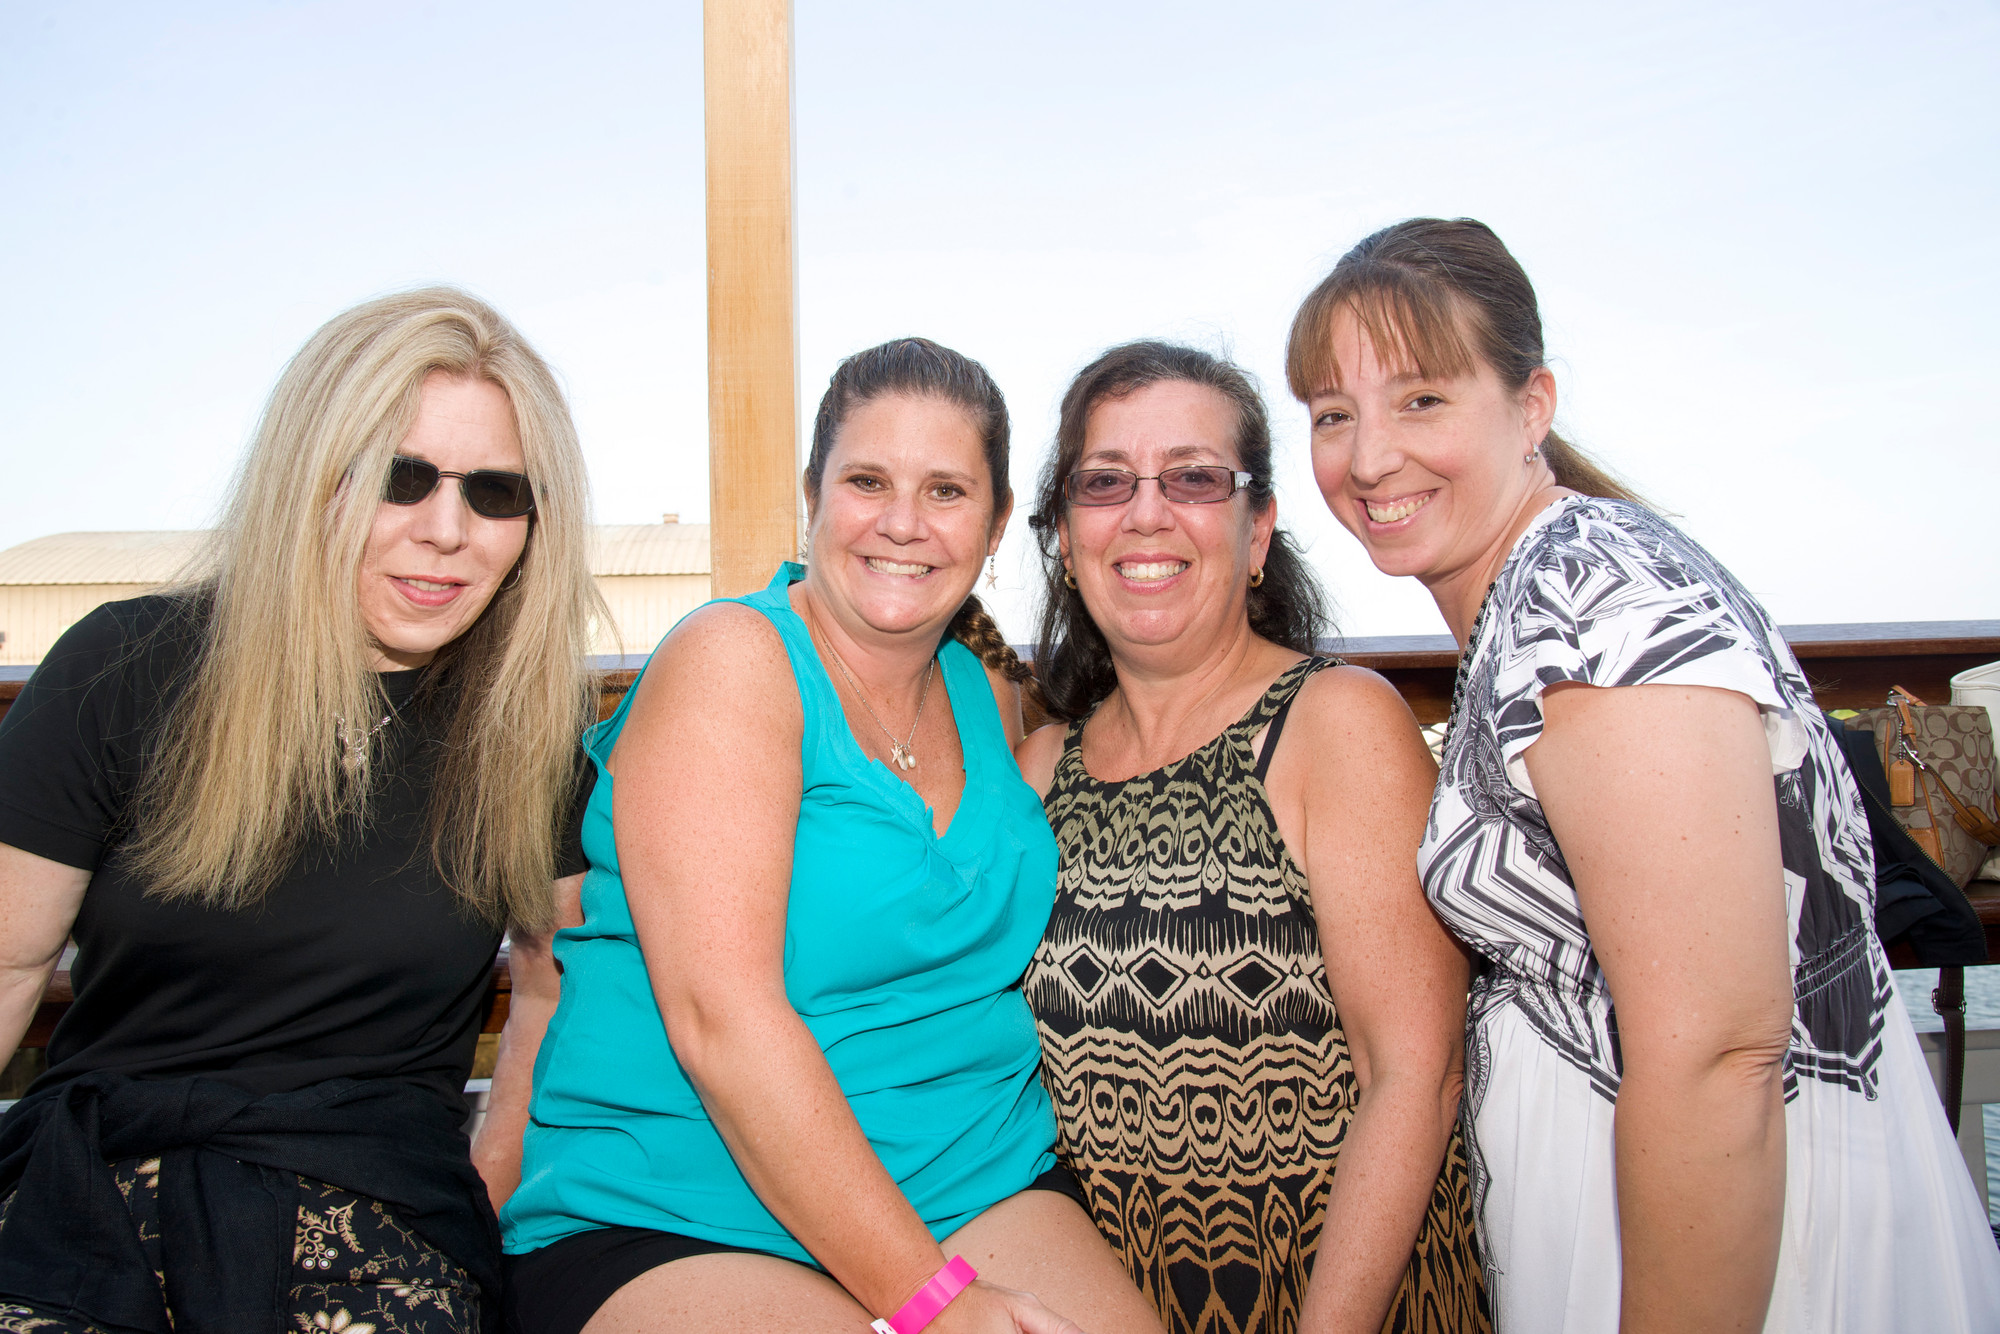 Trish Daly Louw, Camille Murphy, Christine Jaskowiak and Connie Cicero at the fundraiser.